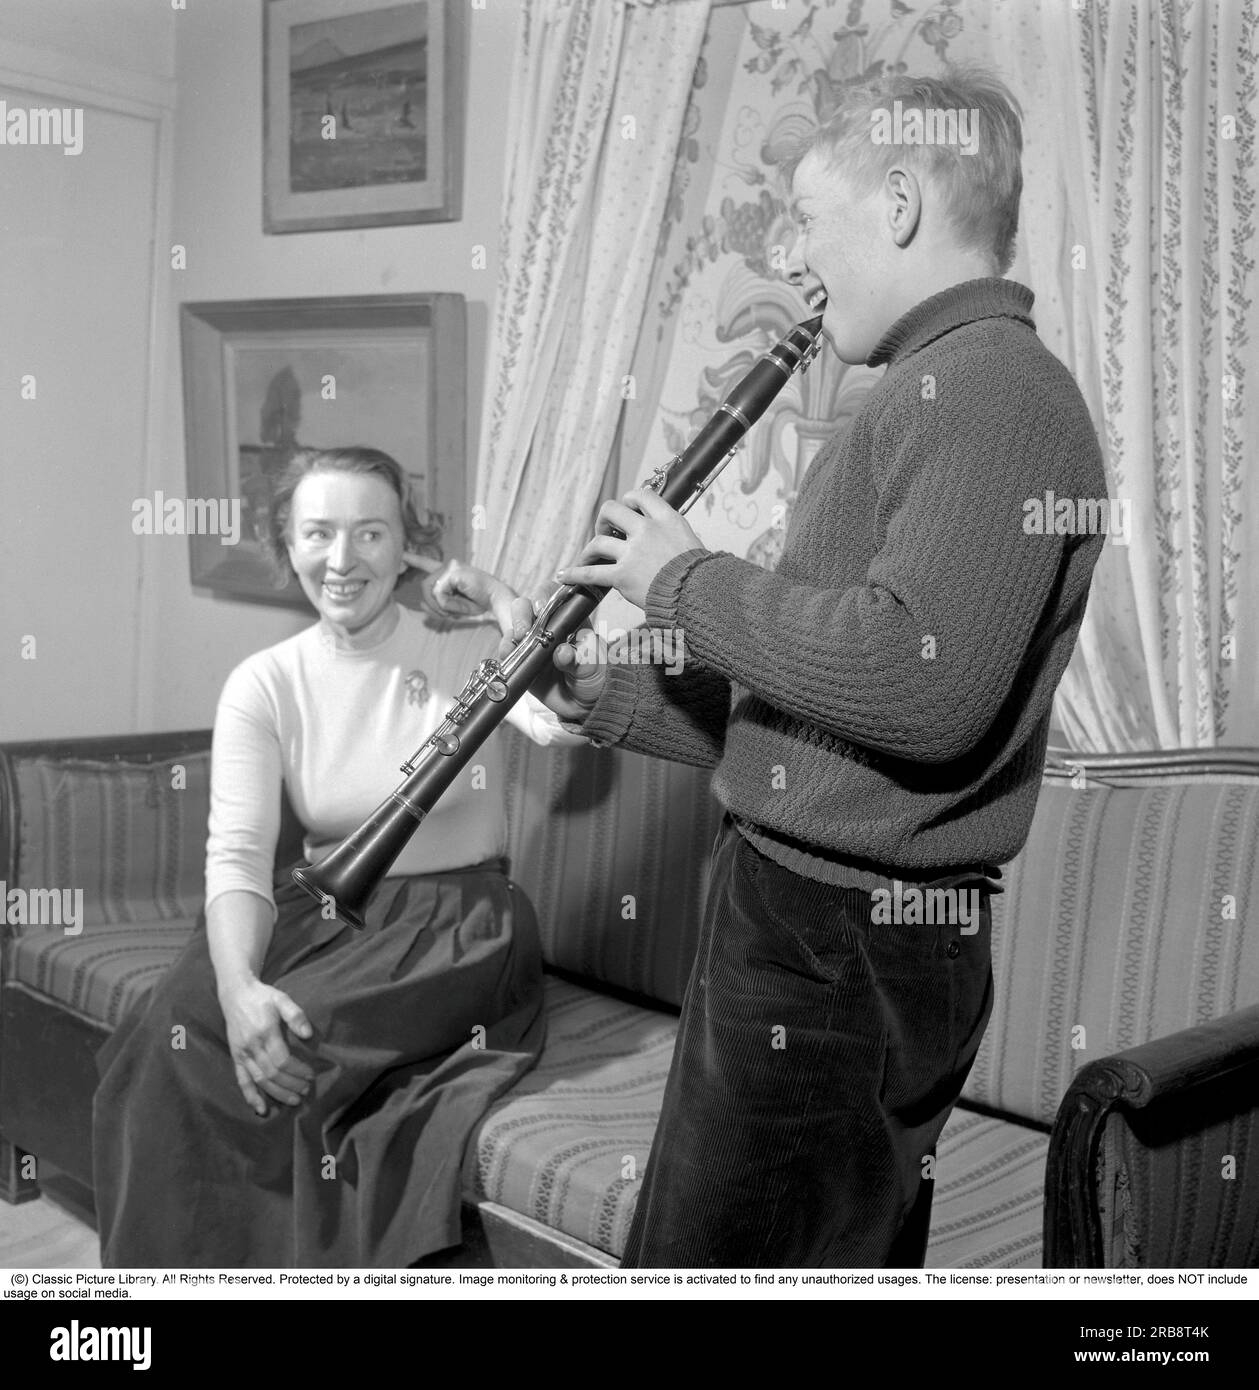 At Rune Lindström's home (1916-1973)  Swedish screenwriter and actor.  Here his wife with their son in a picture taken in their home in Leksand in 1958. Sweden. He is seen happily playing his clarinet thinking it sounds good but judging by his mother's reaction and her finger in one ear, as if to protect herself from the noise, the playing does not sound good. Conard ref 3672 Stock Photo